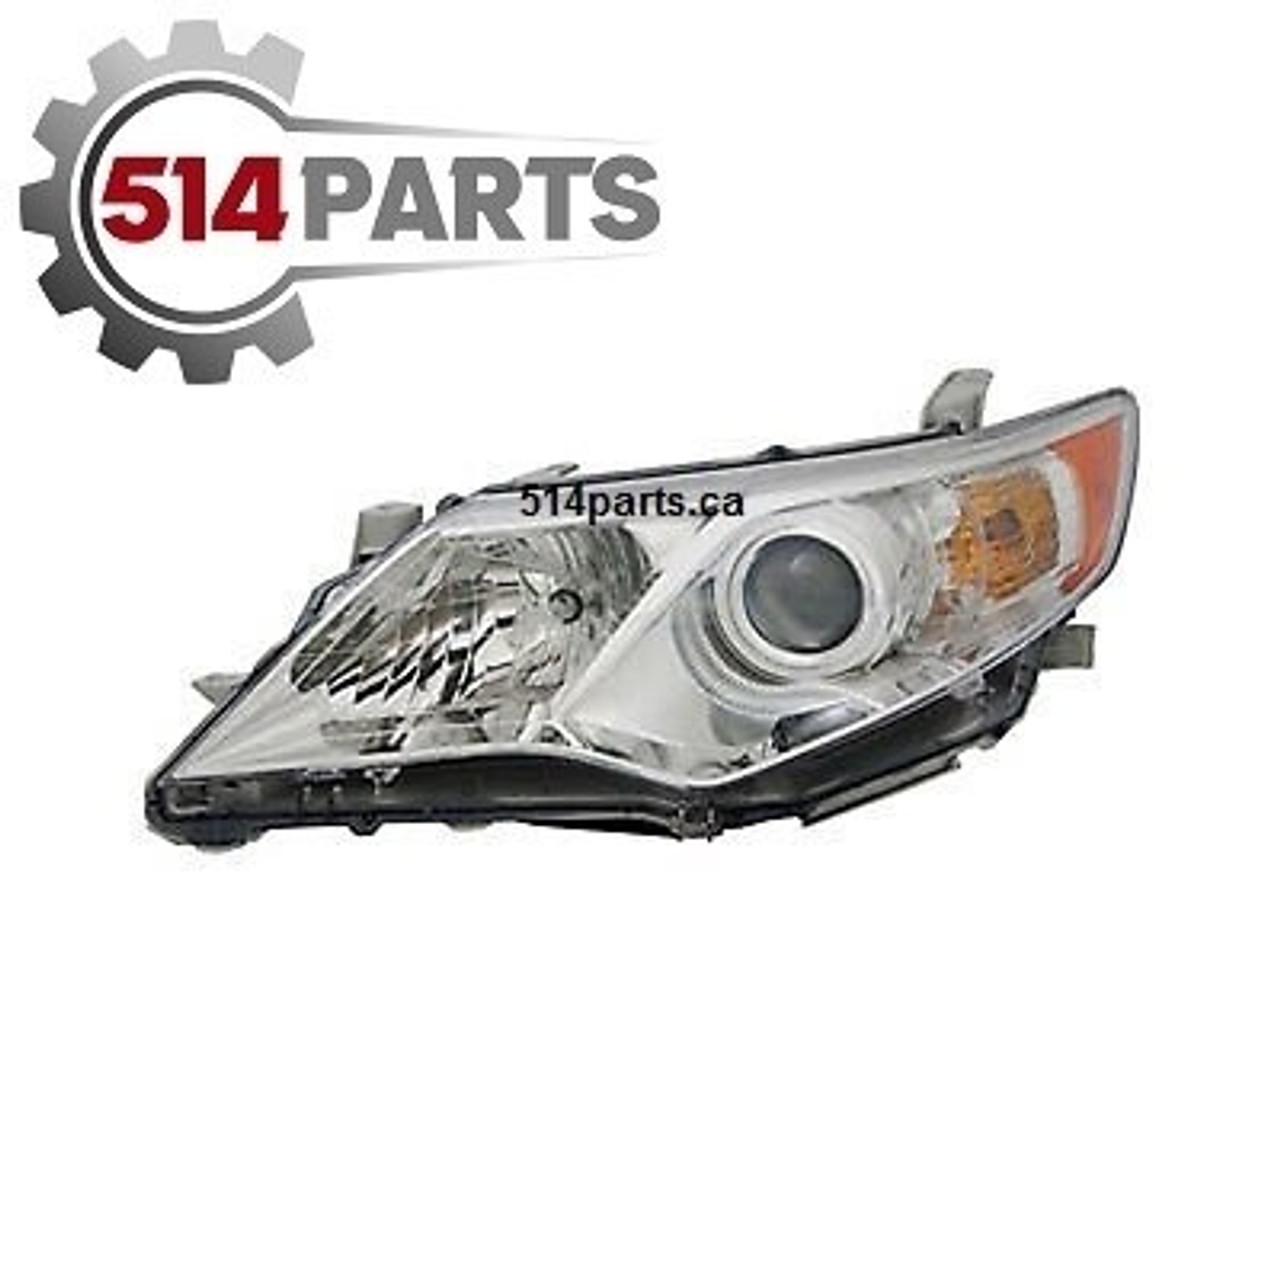 2012 - 2014 TOYOTA CAMRY and CAMRY HYBRID L/LE/XLE Models HEADLIGHTS - PHARES AVANT